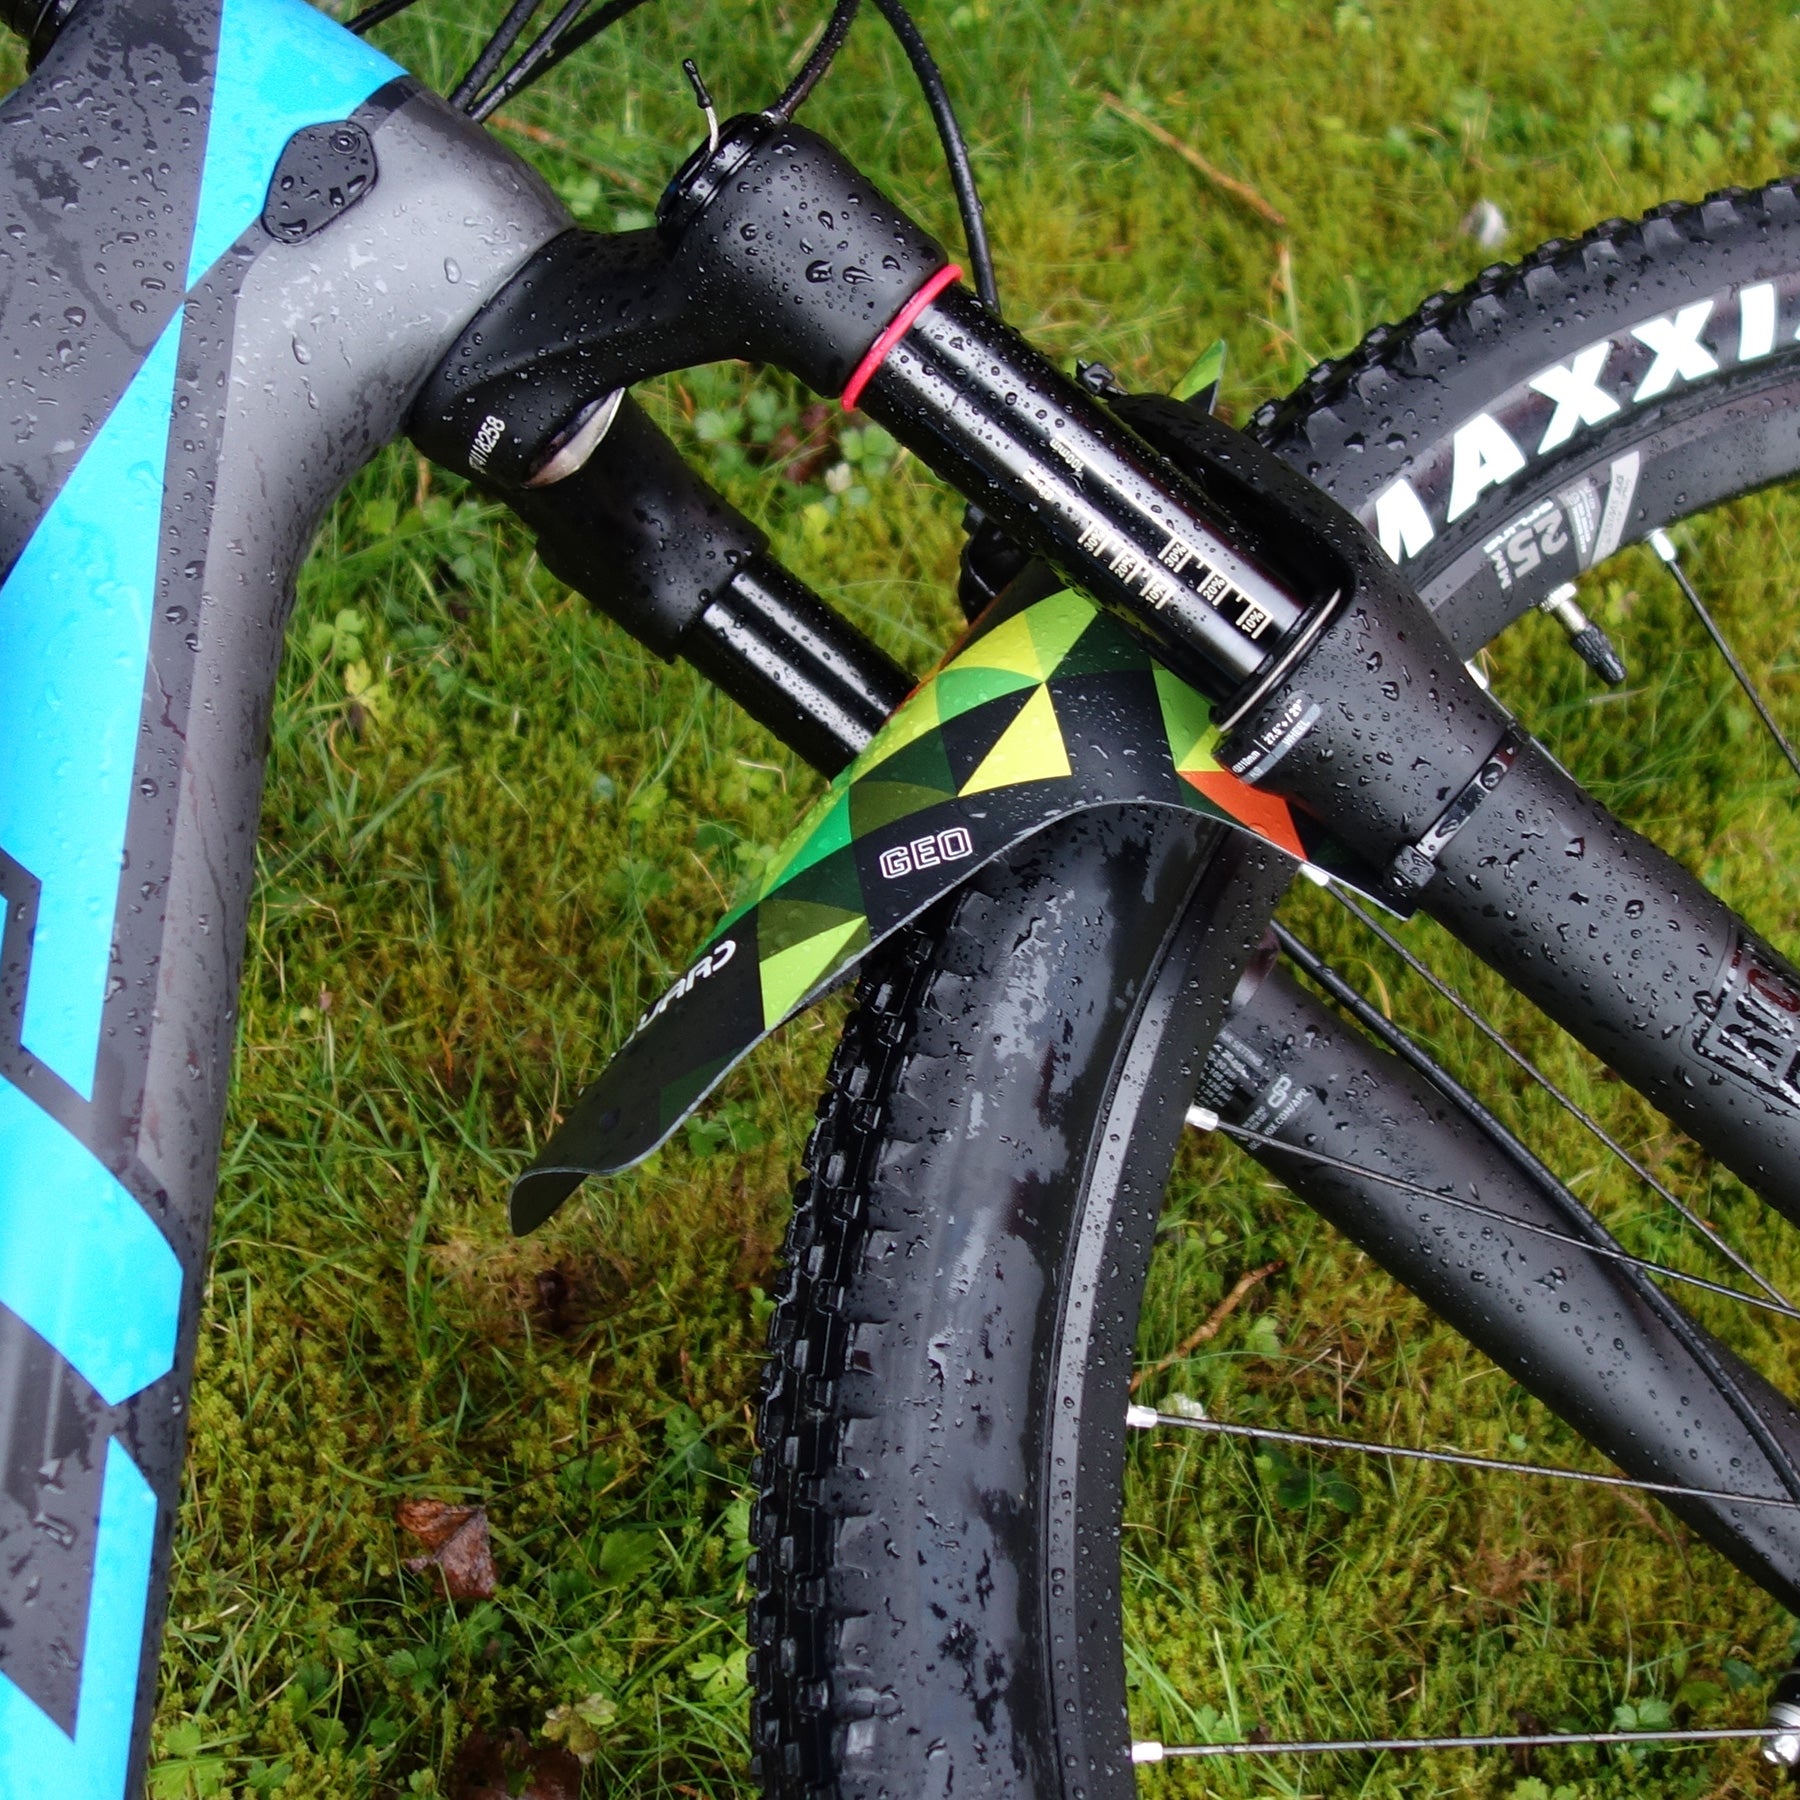 Buyers Guide to the Best Mountain Bike Mudguards